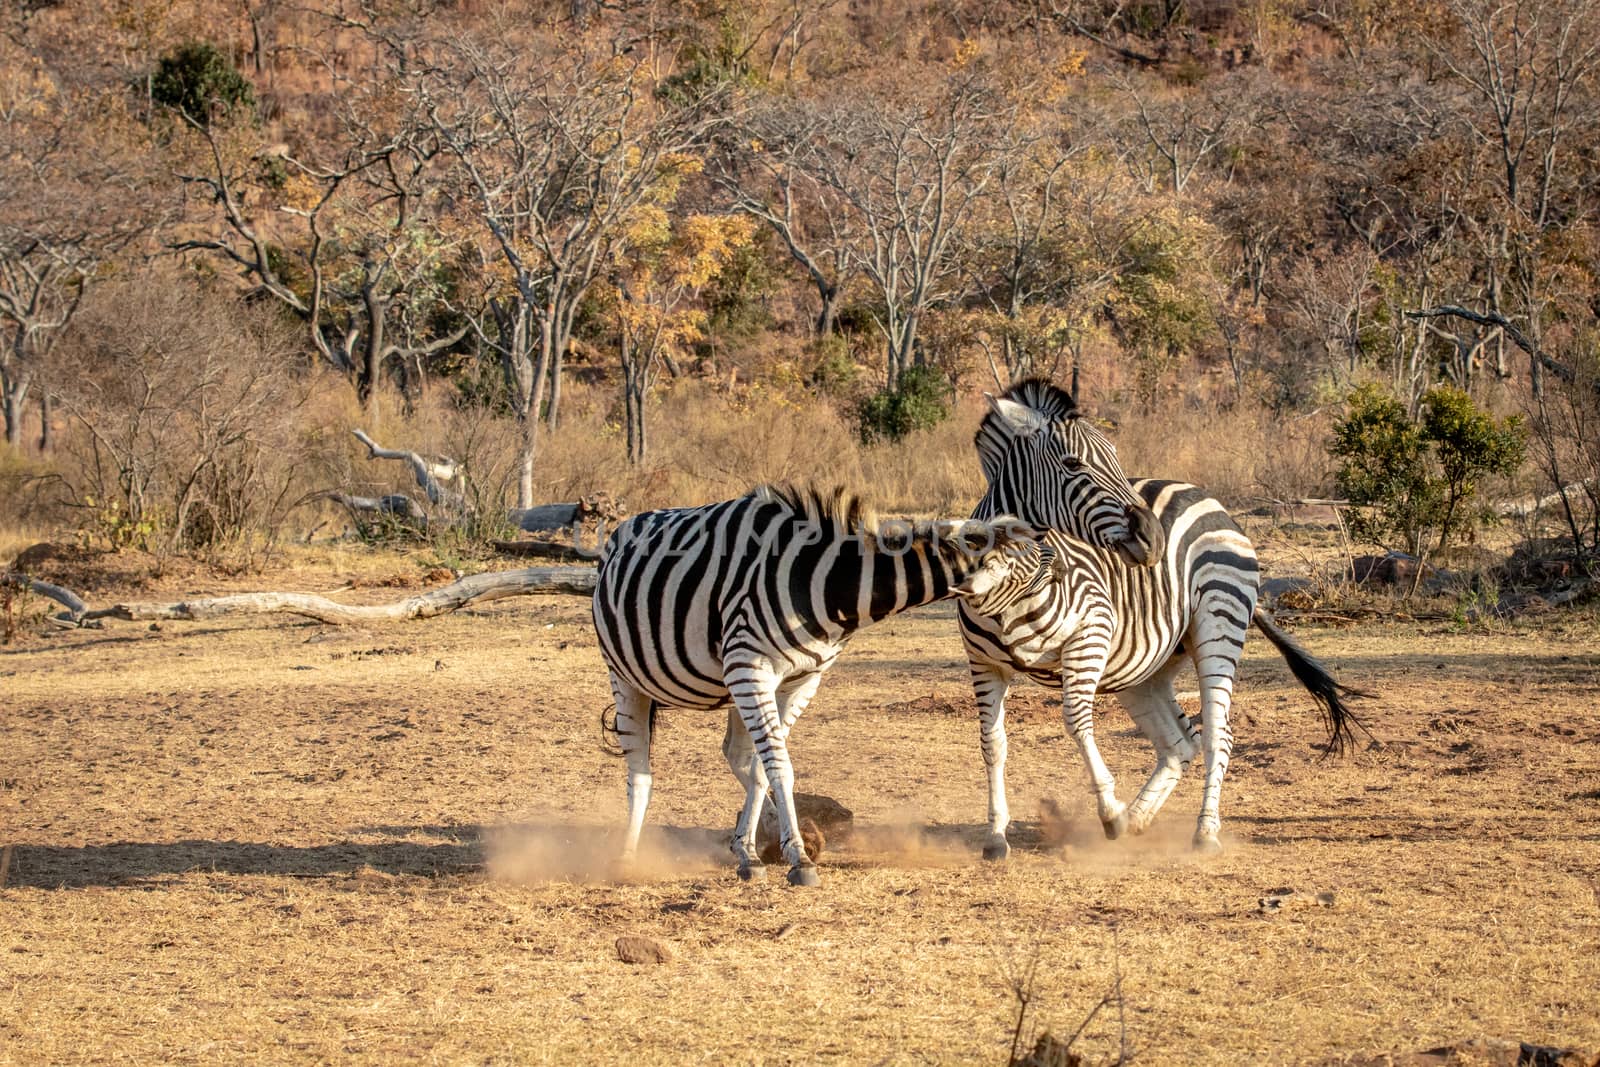 Two Zebras fighting on a plain. by Simoneemanphotography